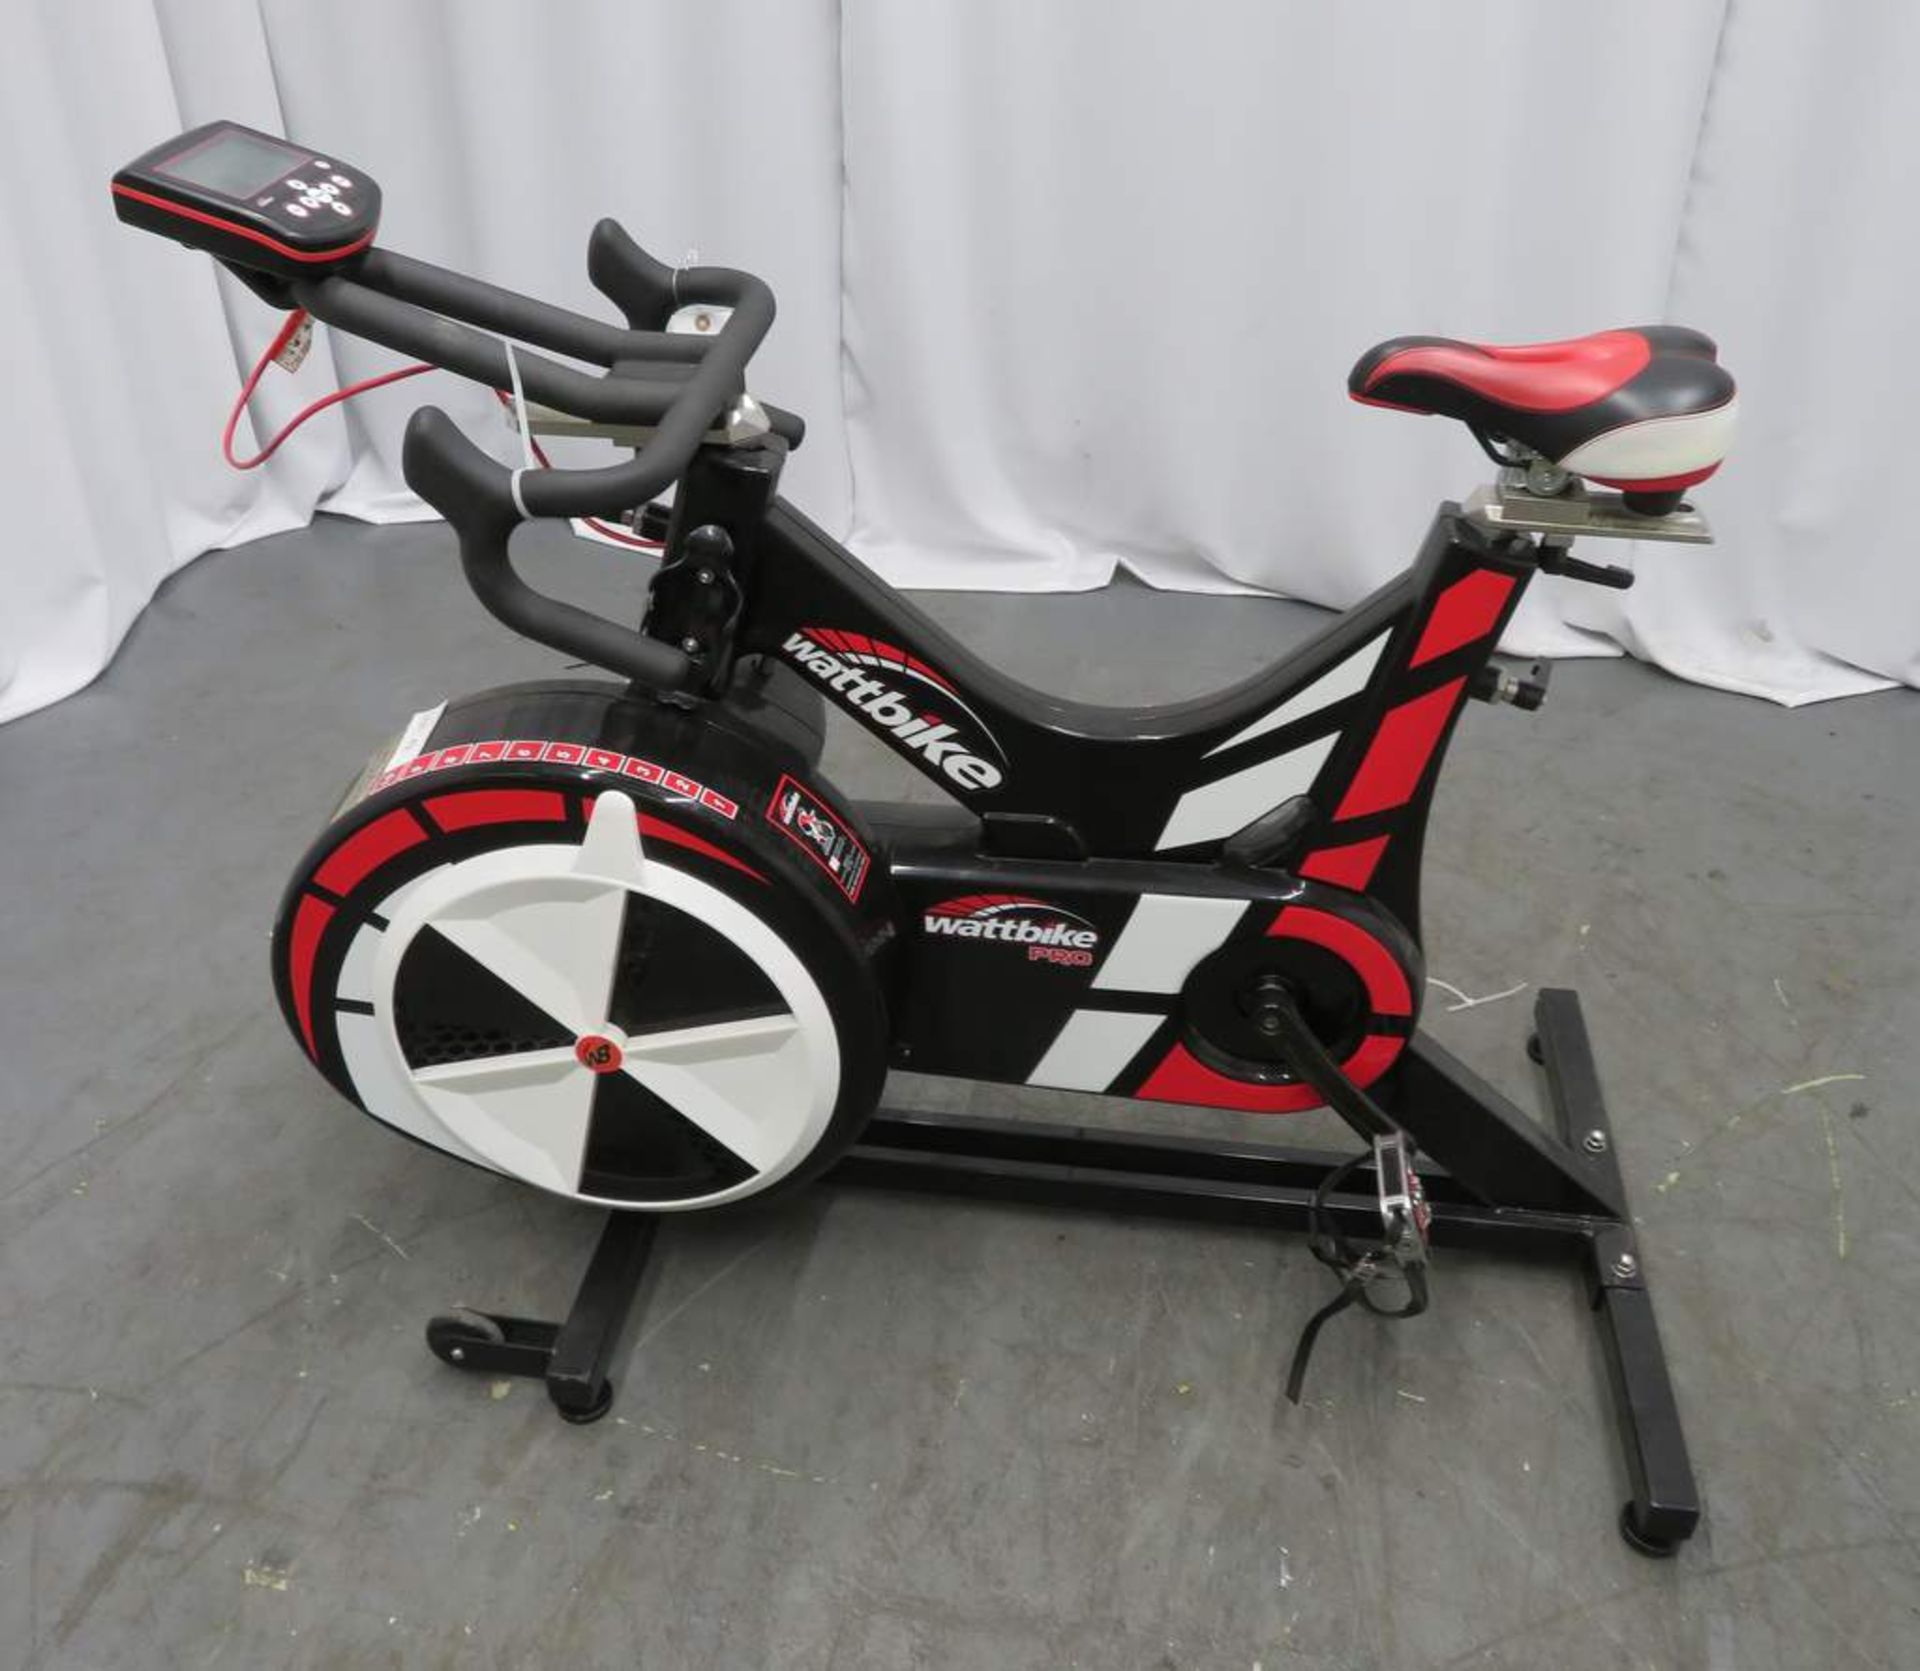 Watt Bike Trainer Exercise Bike, Complete With Model B Console. - Image 2 of 10